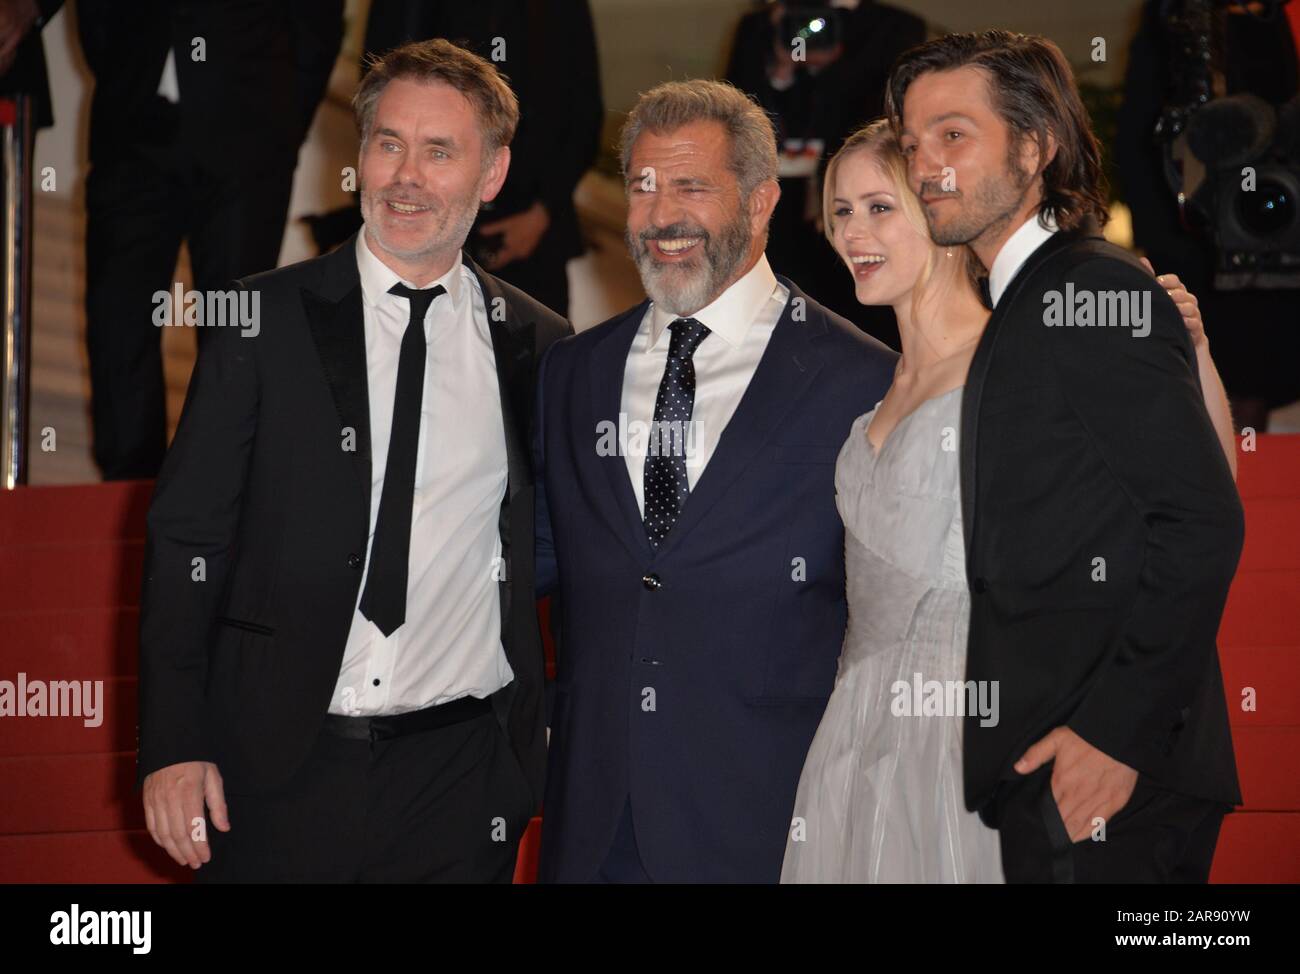 CANNES, FRANCE - MAY 22, 2016: Director Jean-Francois Richet & actors Mel Gibson, Diego Luna & Erin Moriarty at the gala premiere for 'Blood Father' at the 69th Festival de Cannes. Stock Photo